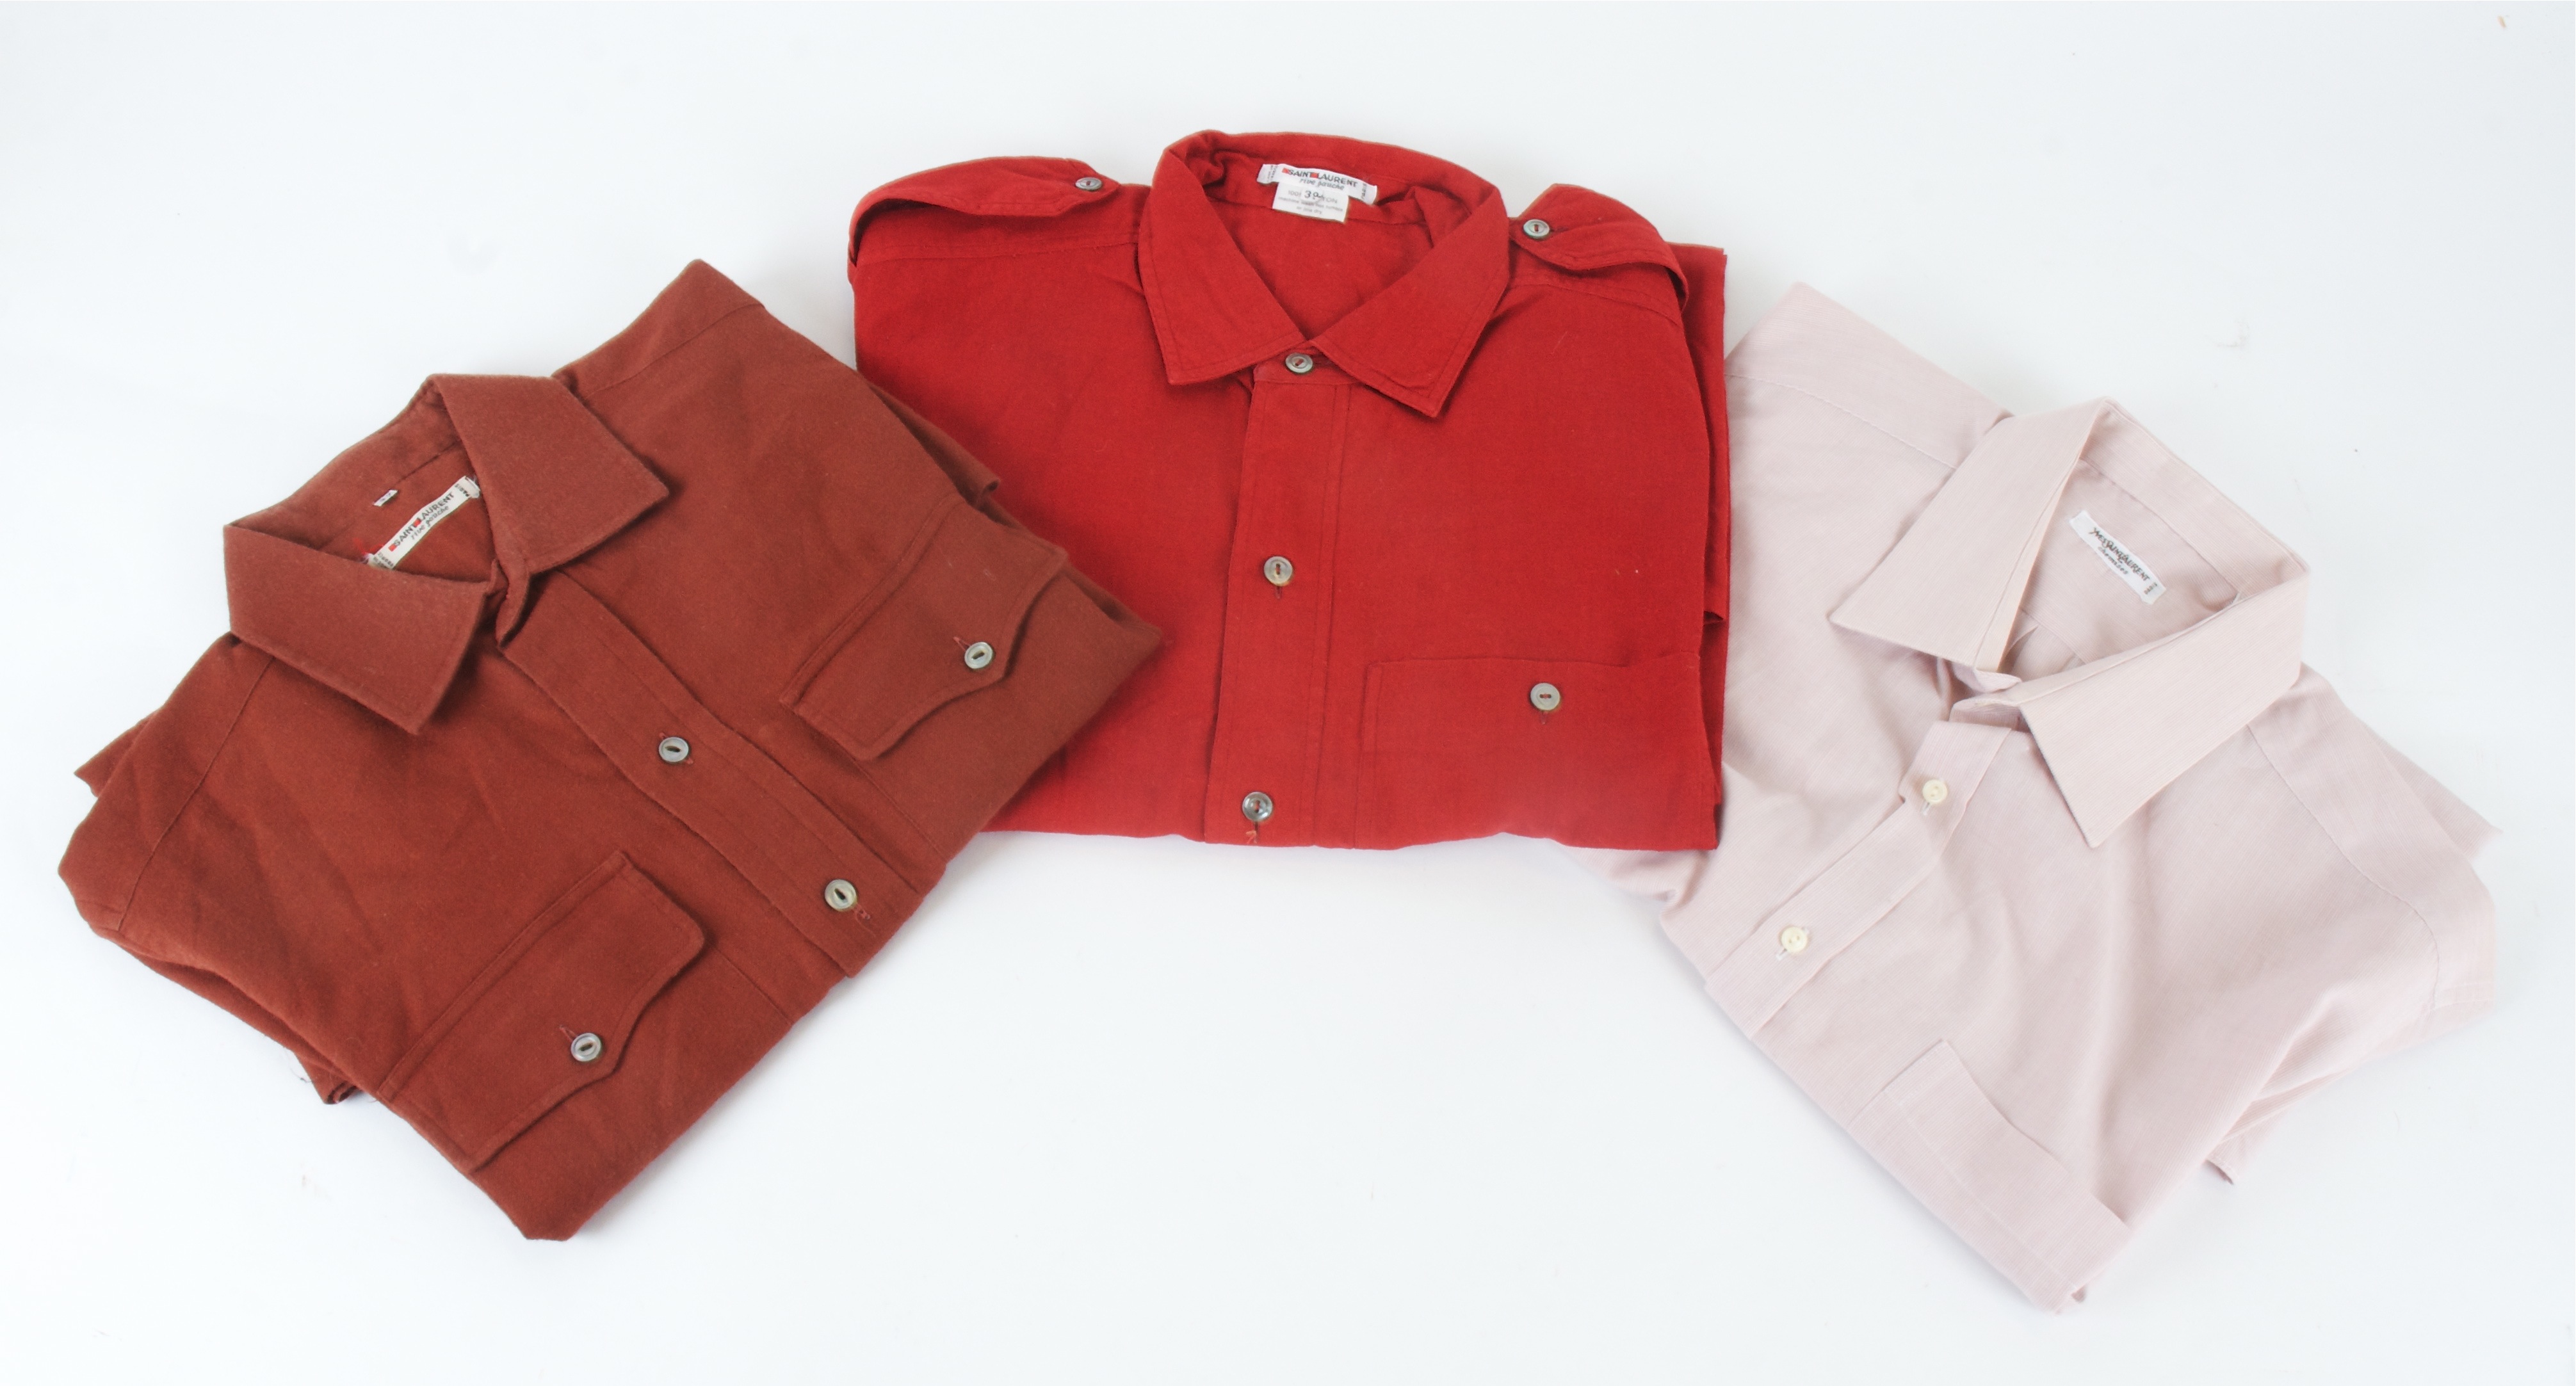 Three gentlemans' Saint Laurent shirts, including a rust coloured example from the Viyella range (